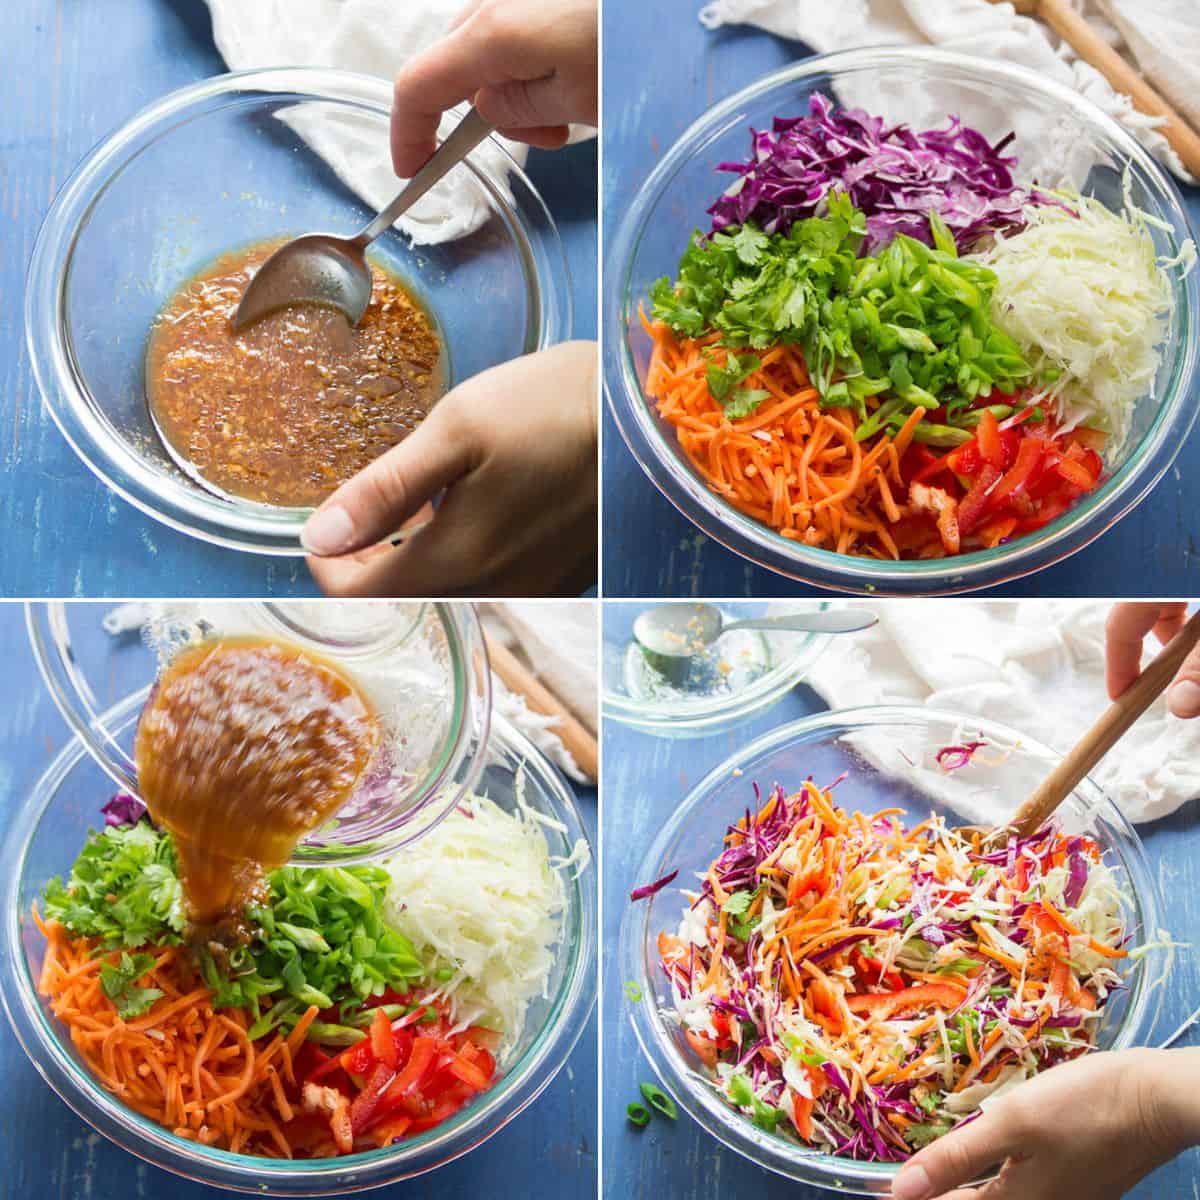 Collage showing the 4 steps for making Asian Slaw.